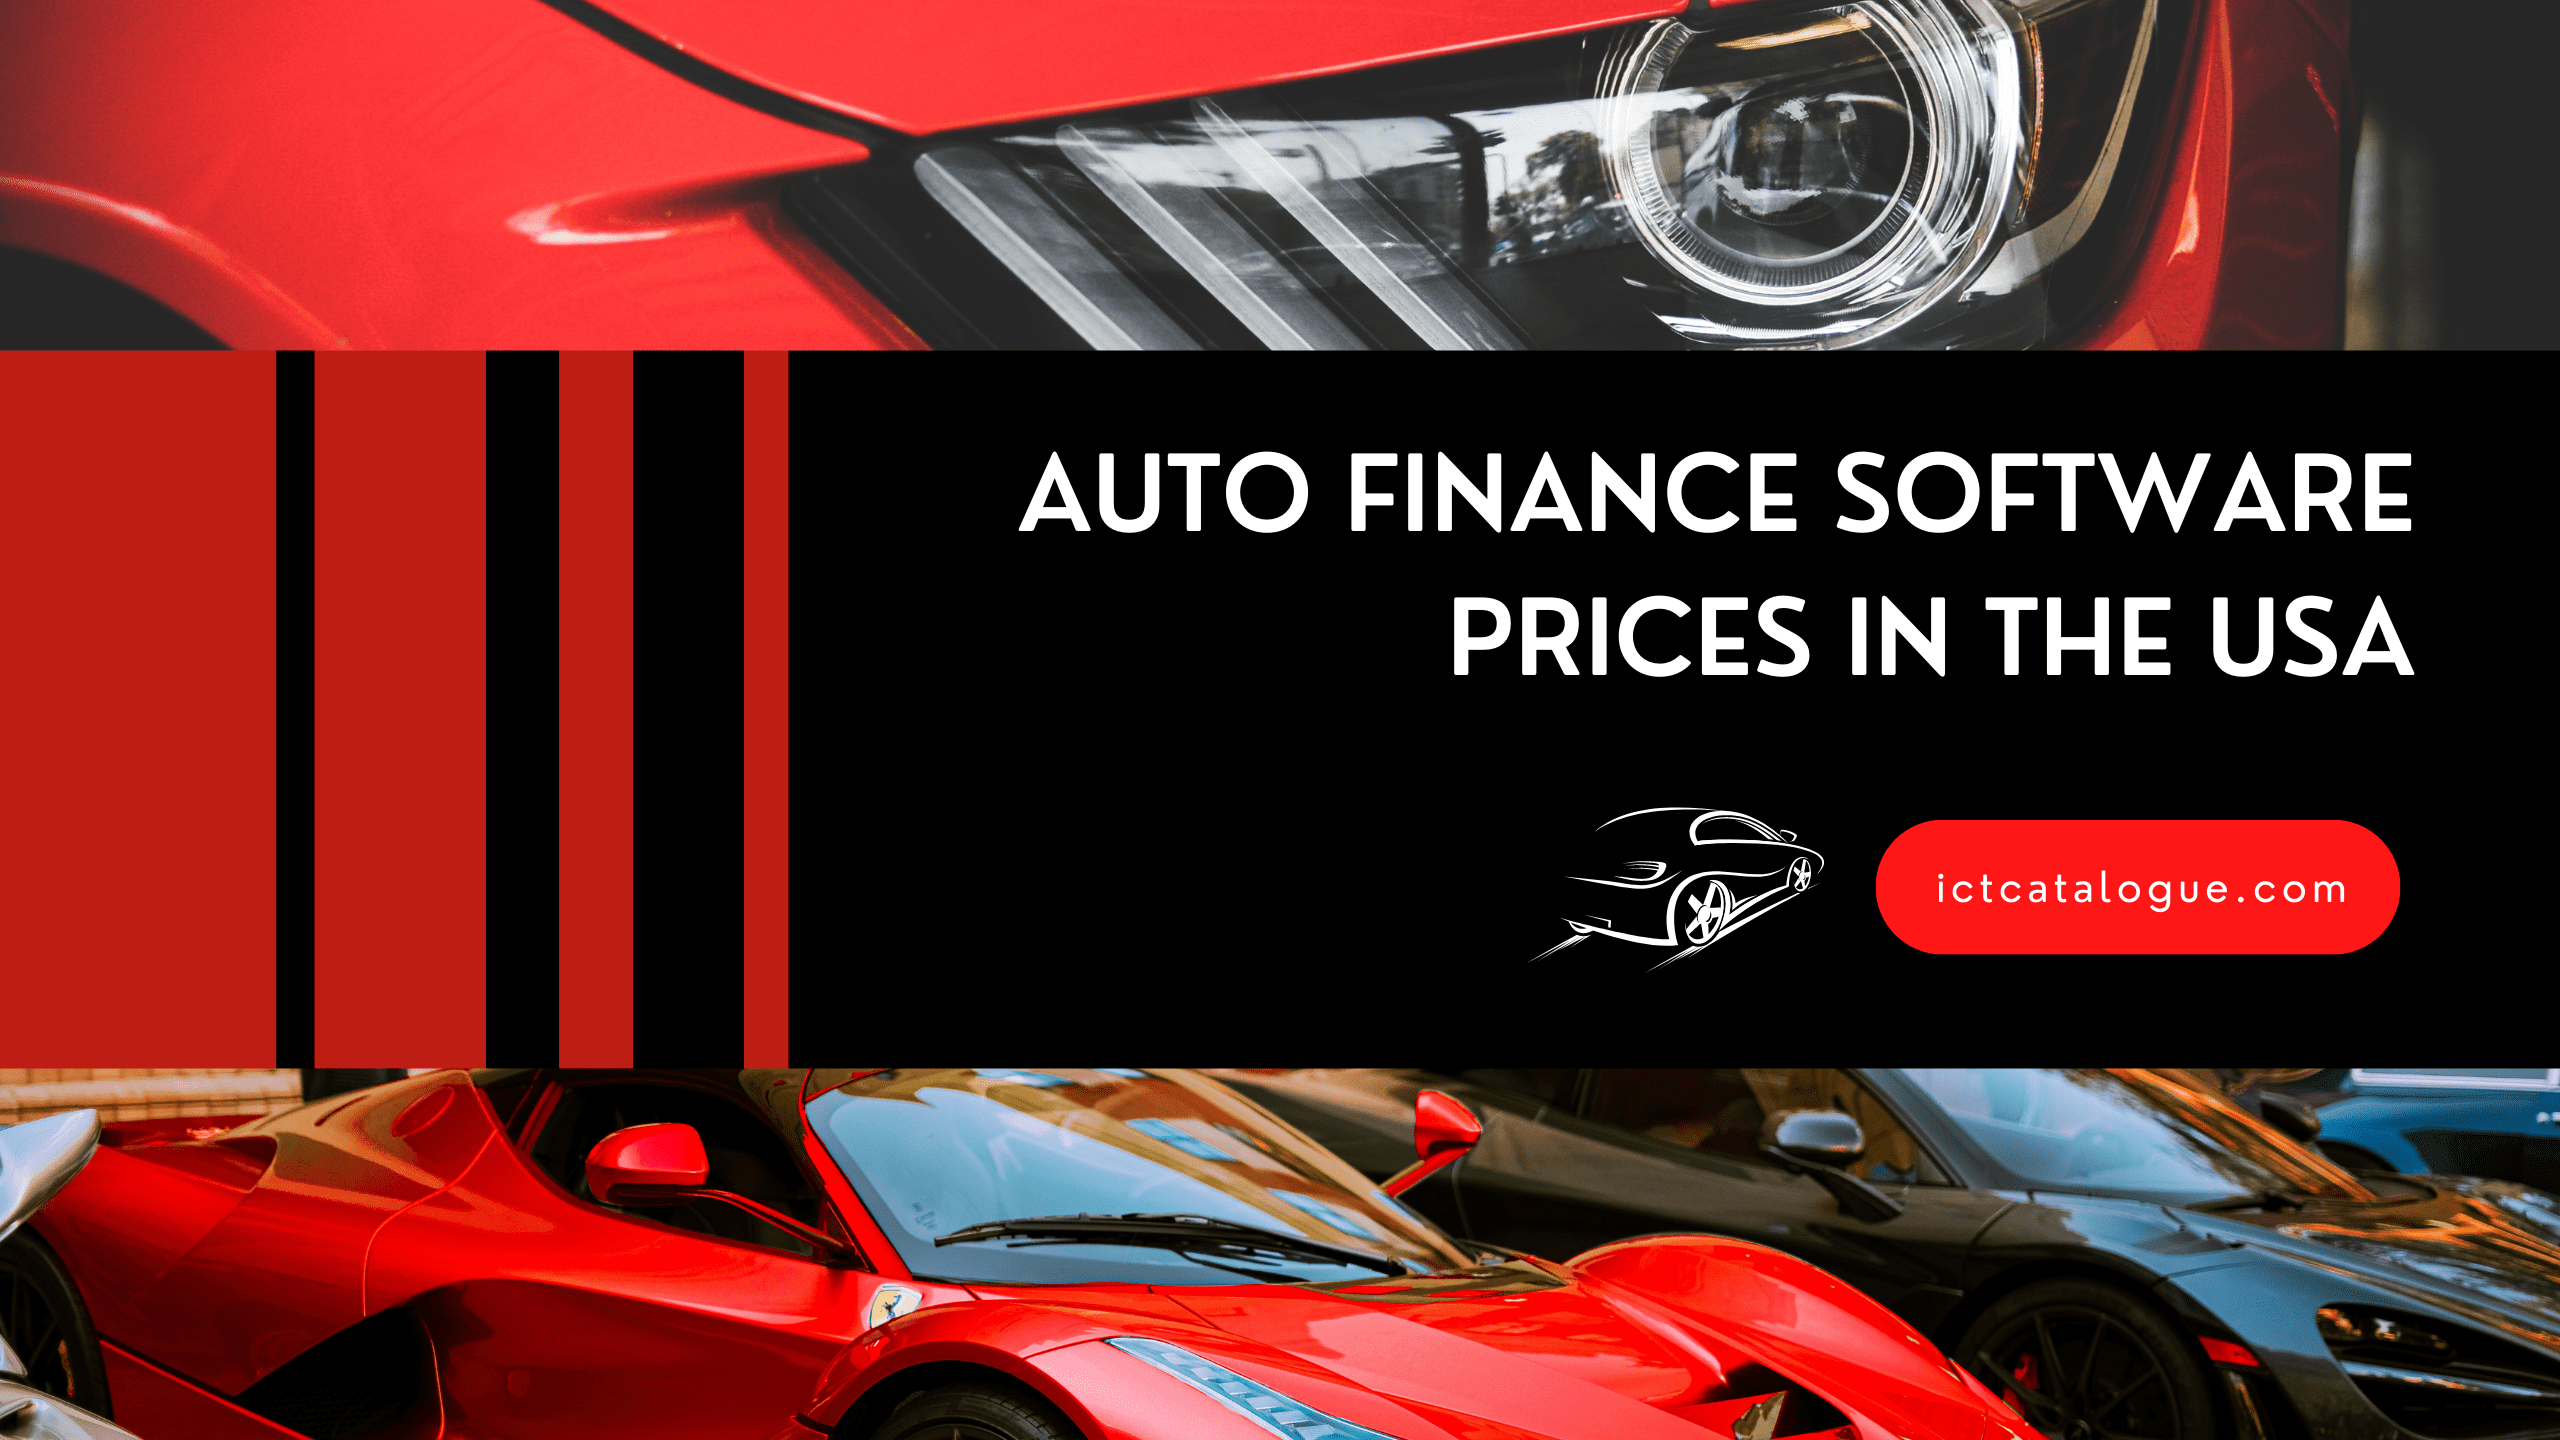 Auto Finance Software Prices in the USA (1)